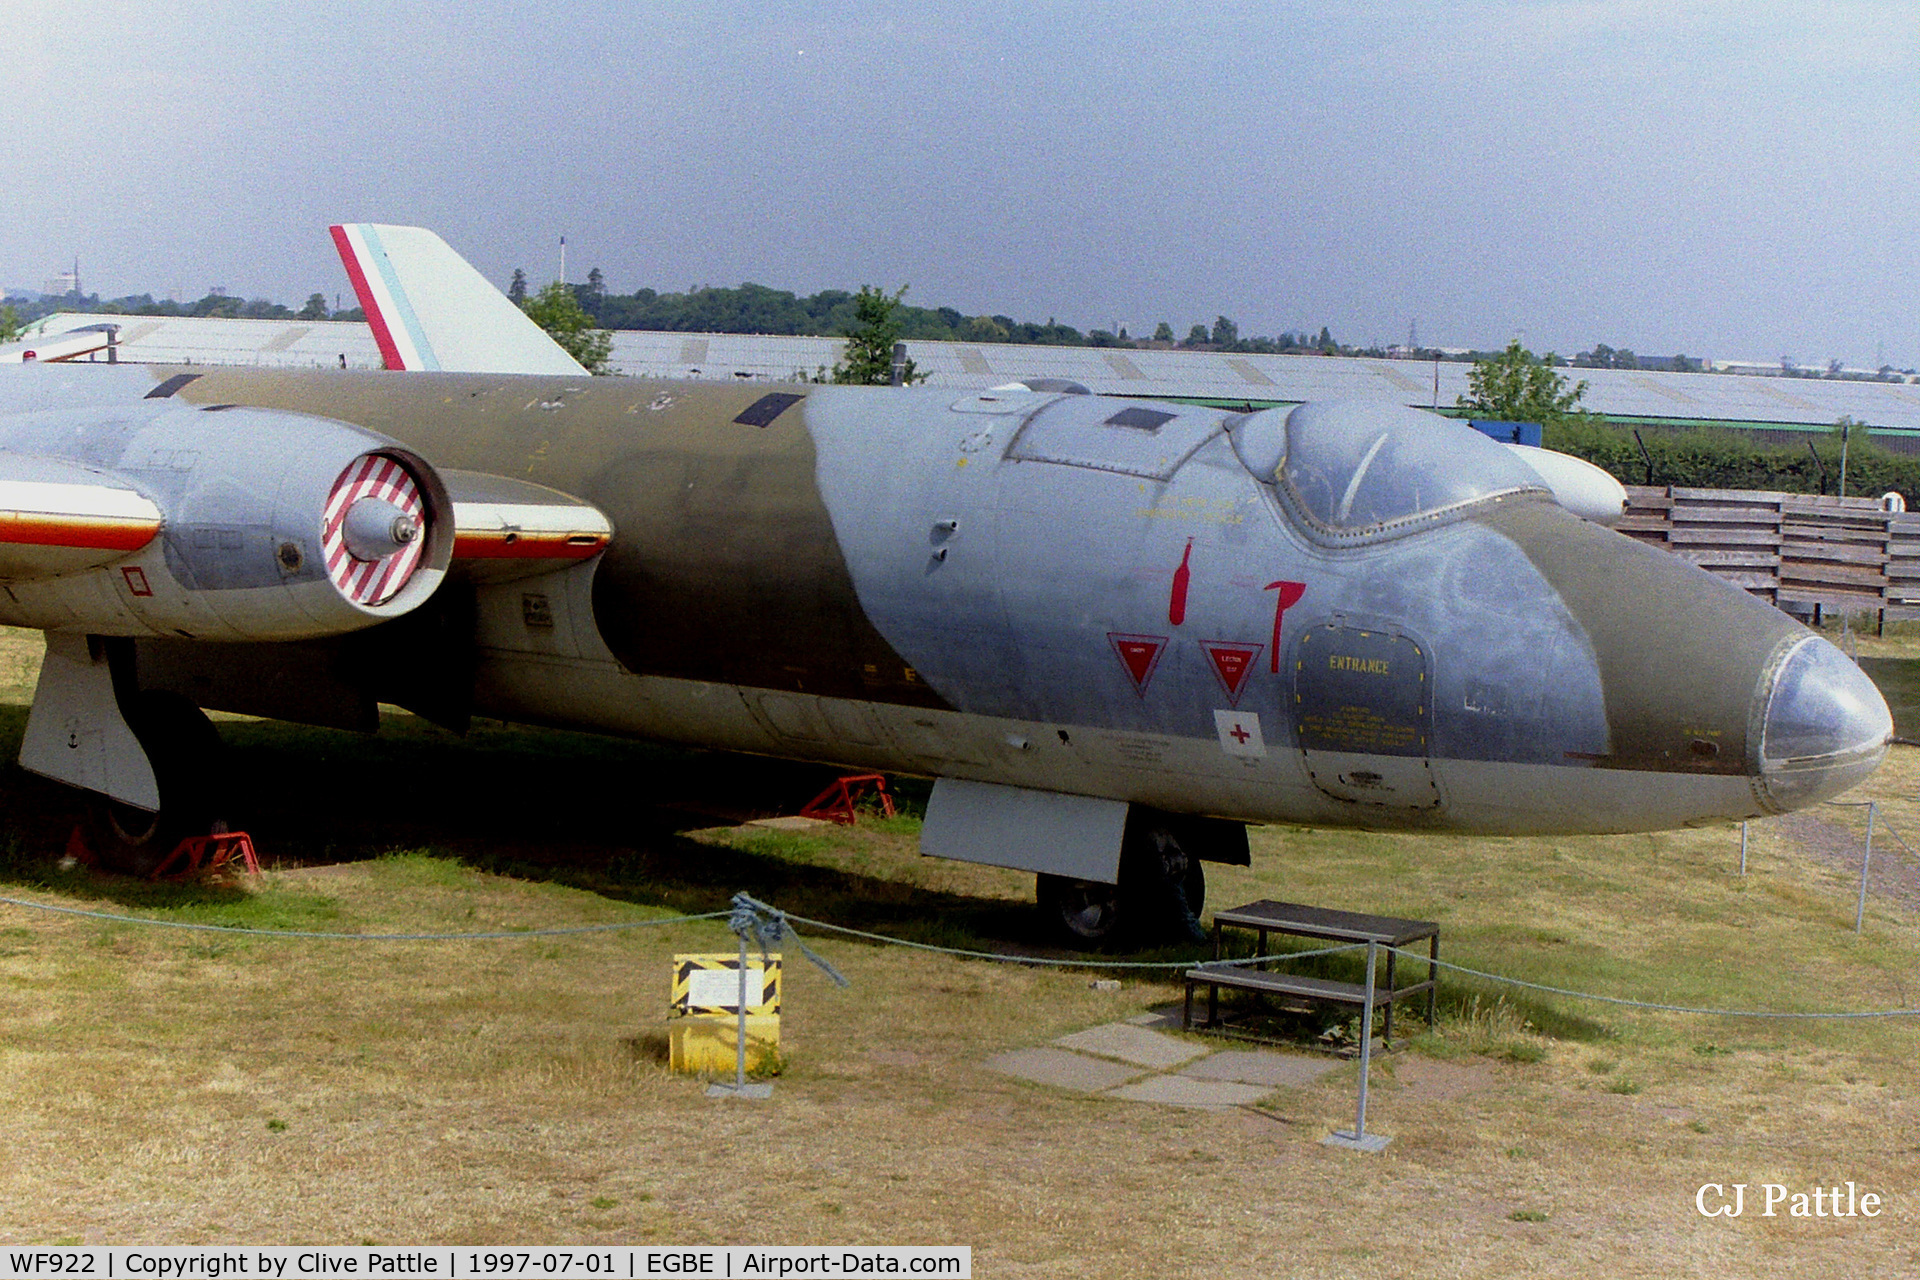 WF922, English Electric PR.3 C/N 71227, Seen in July 1997 at the Midland Air Museum Coventry in its pre-restoration colour scheme